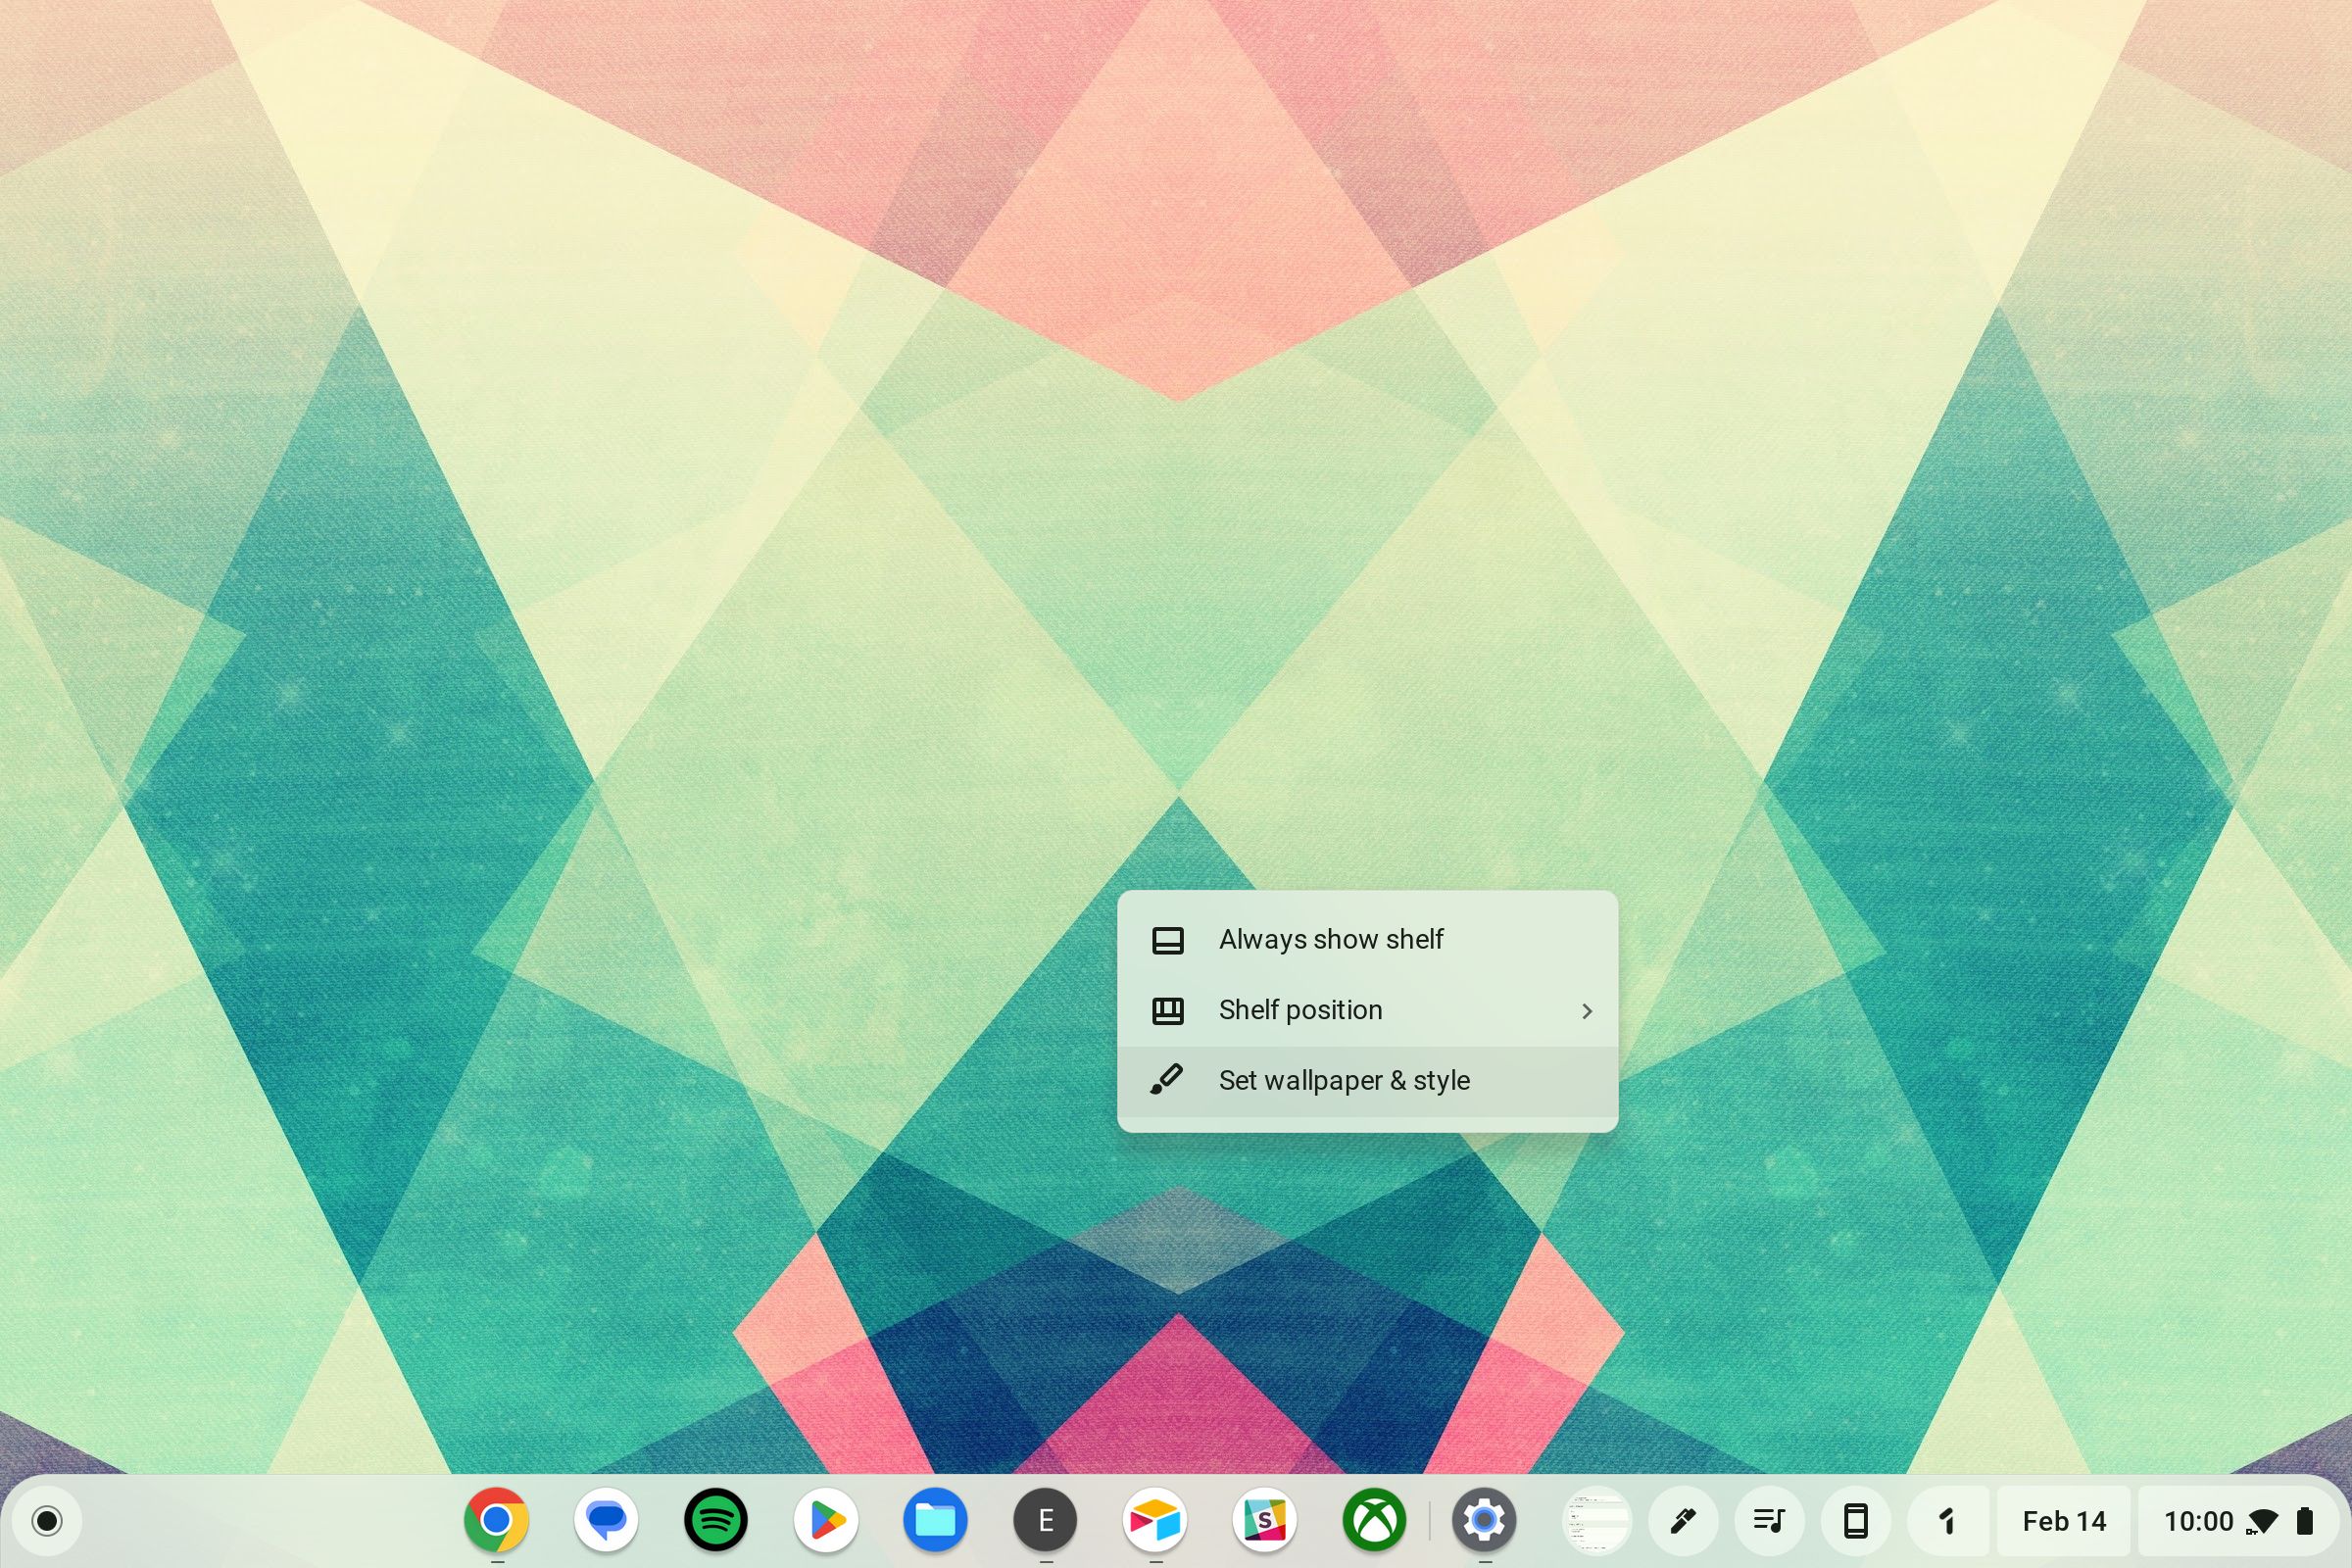 The menu that appears after right-clicking on a Chromebook's home screen